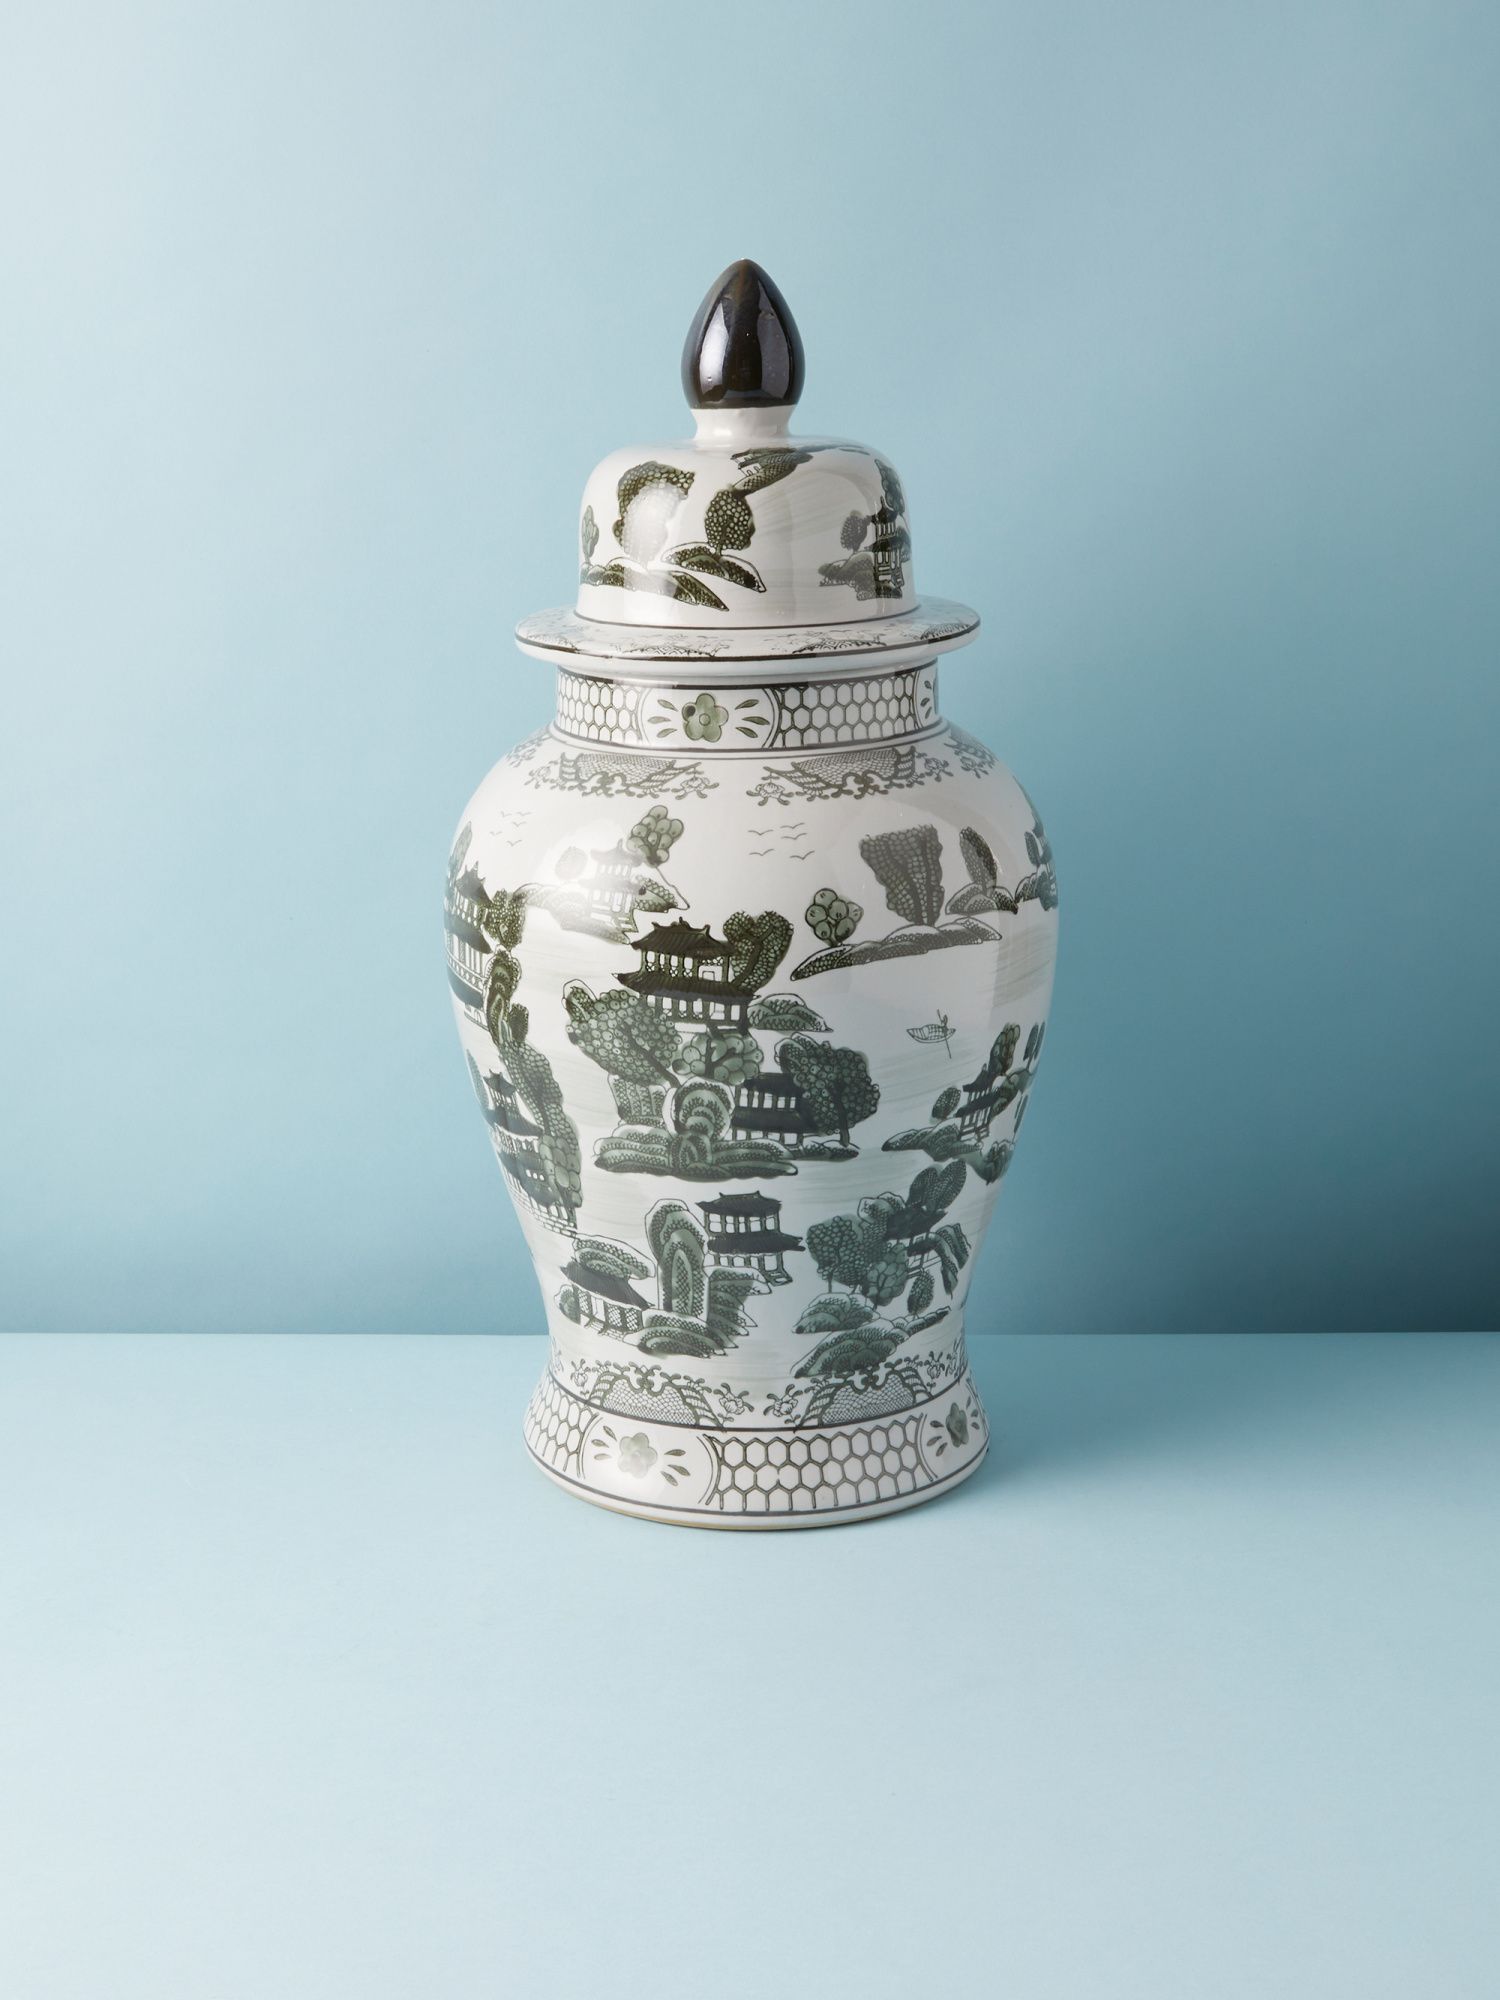 ARTISTIC ACCENTS
							
							26in Ceramic Chinoiserie Ginger Jar
						
						
							

	
		
	... | HomeGoods